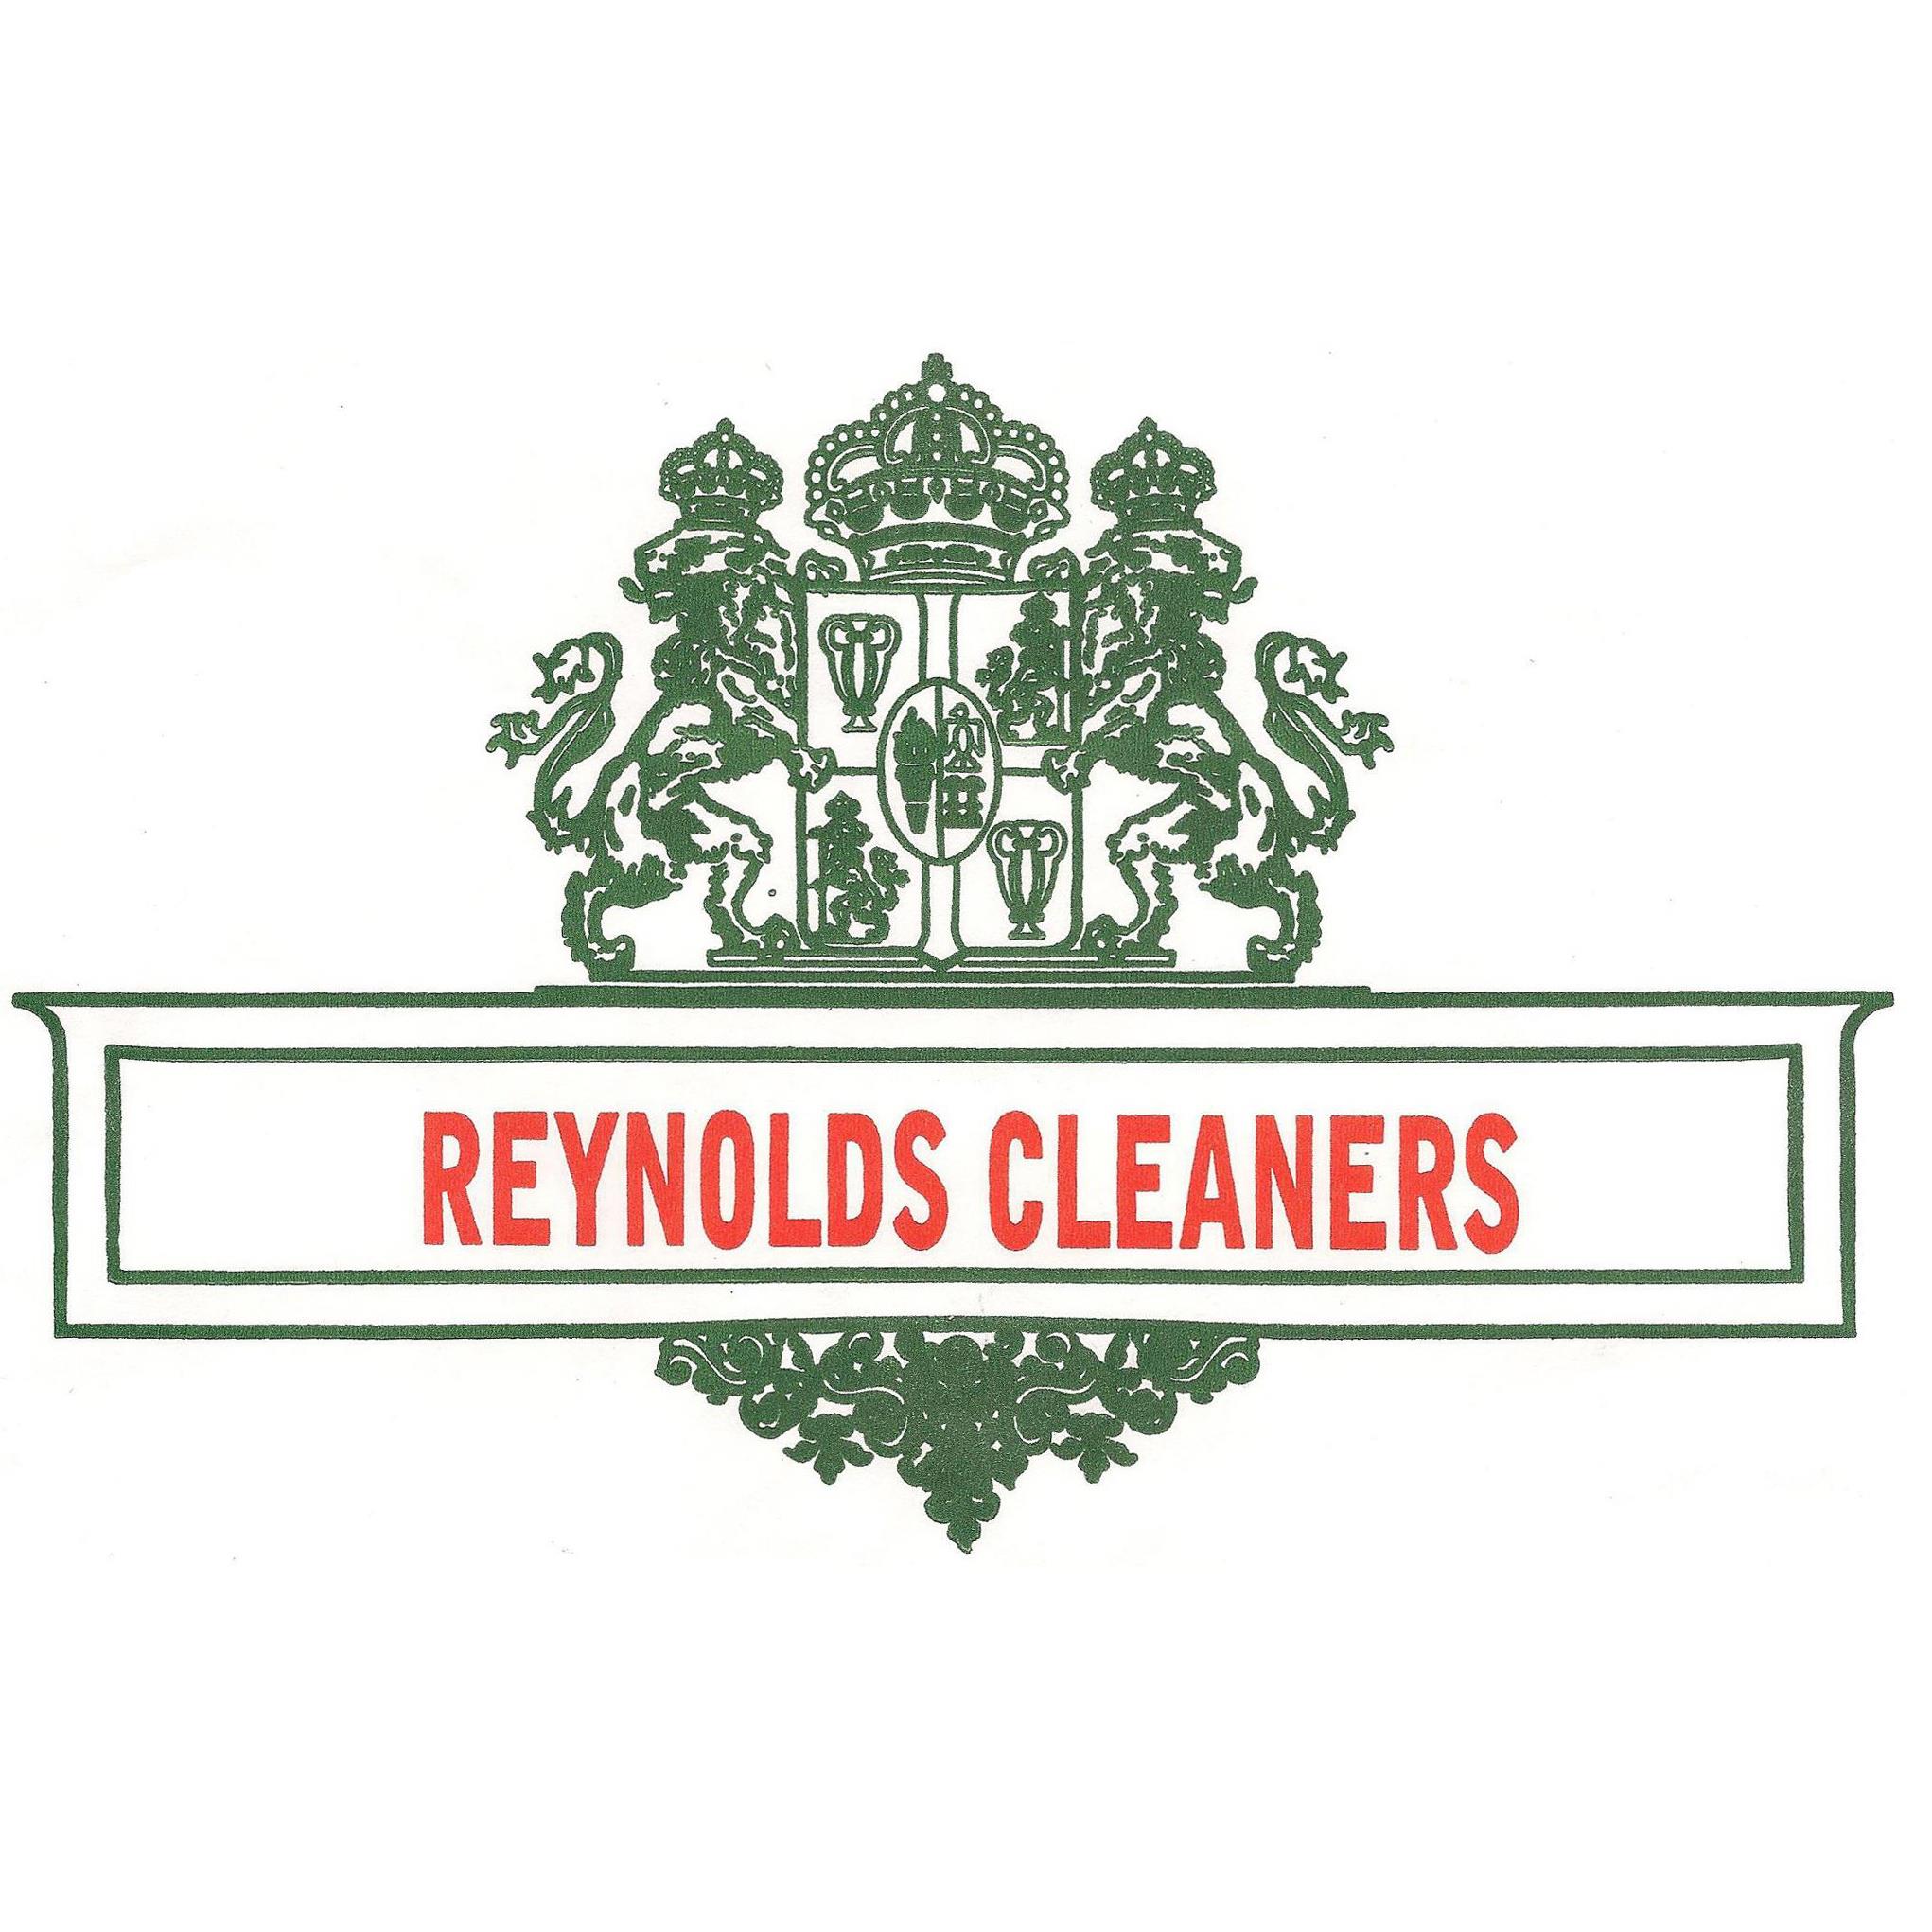 Reynolds Cleaners